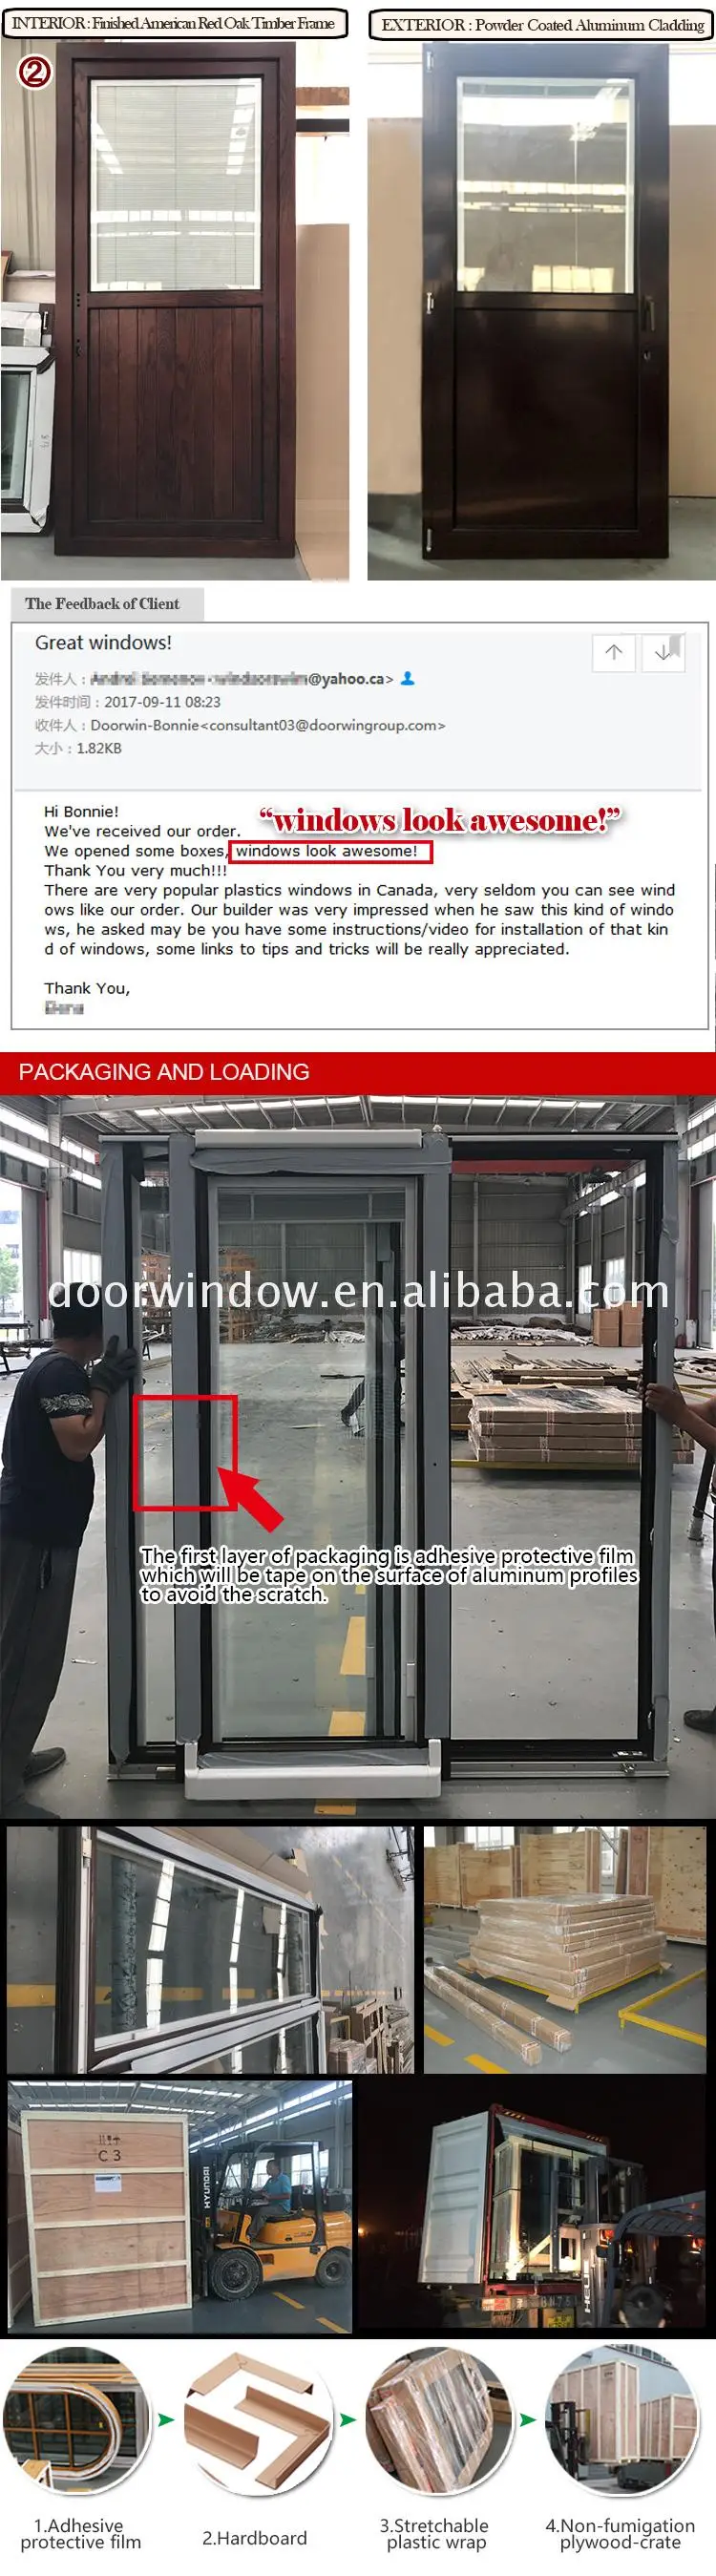 Wholesale price sliding patio door frame replacement doors lowes quality